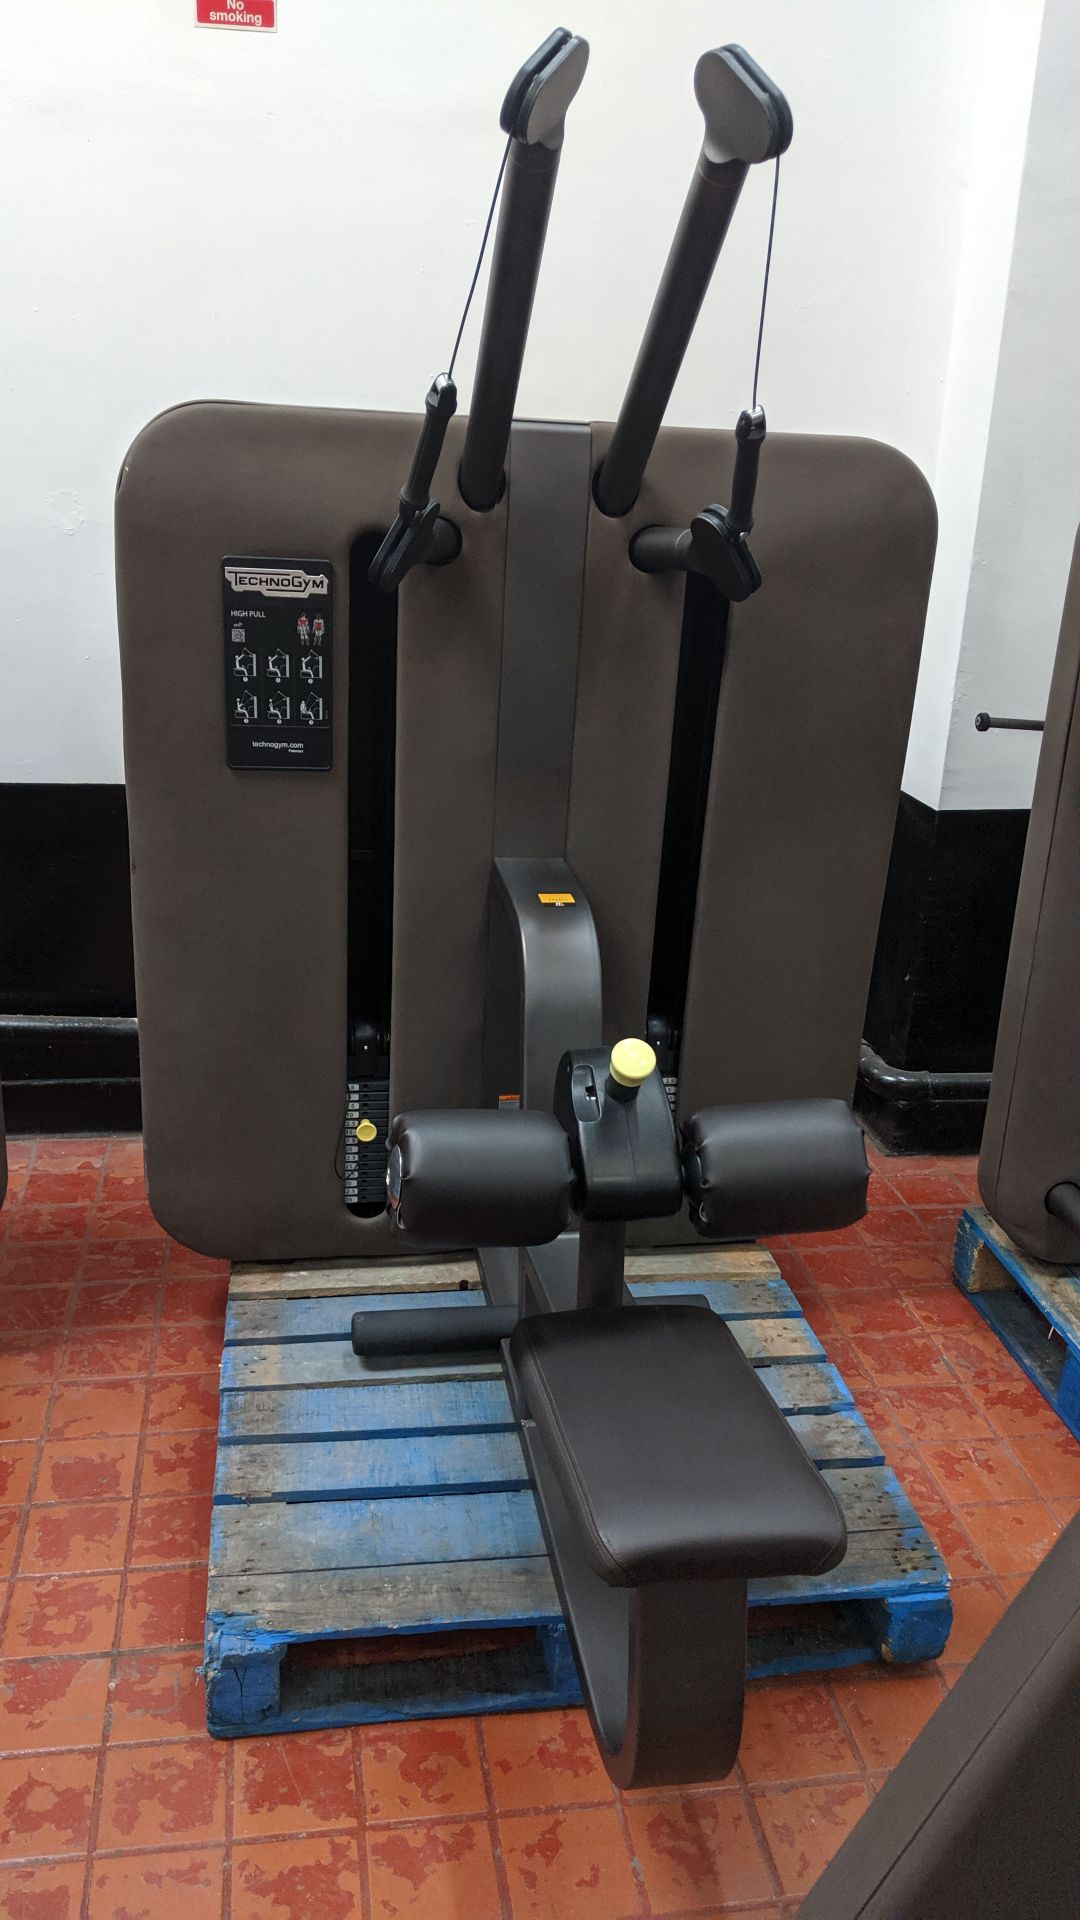 Technogym high pull Purchased new in 2016 - refurbished/recommissioned by Technogym - please see